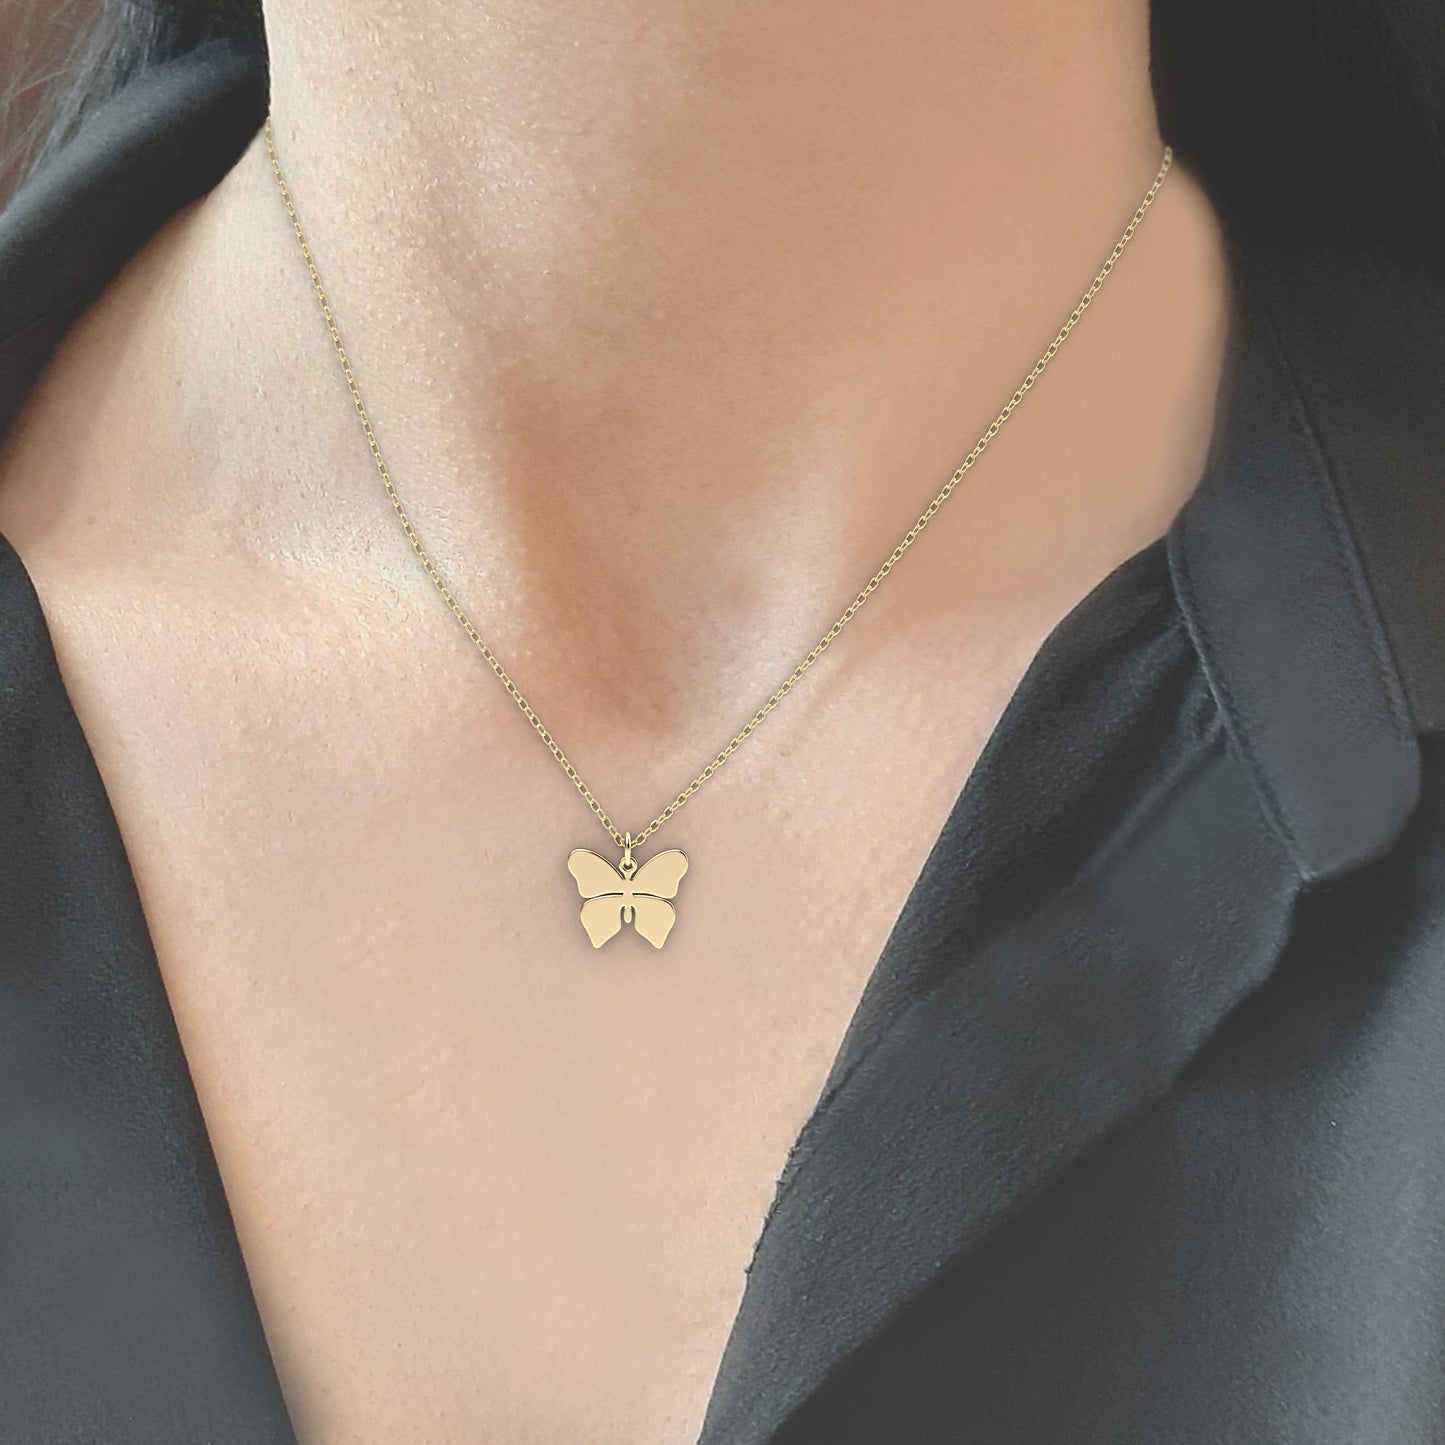 Real 14k Solid Gold Butterfly Necklace, Minimalist Gold Pendant necklace, Tiny Gold Butterfly Necklace, Birthday Gift  layered necklace gift